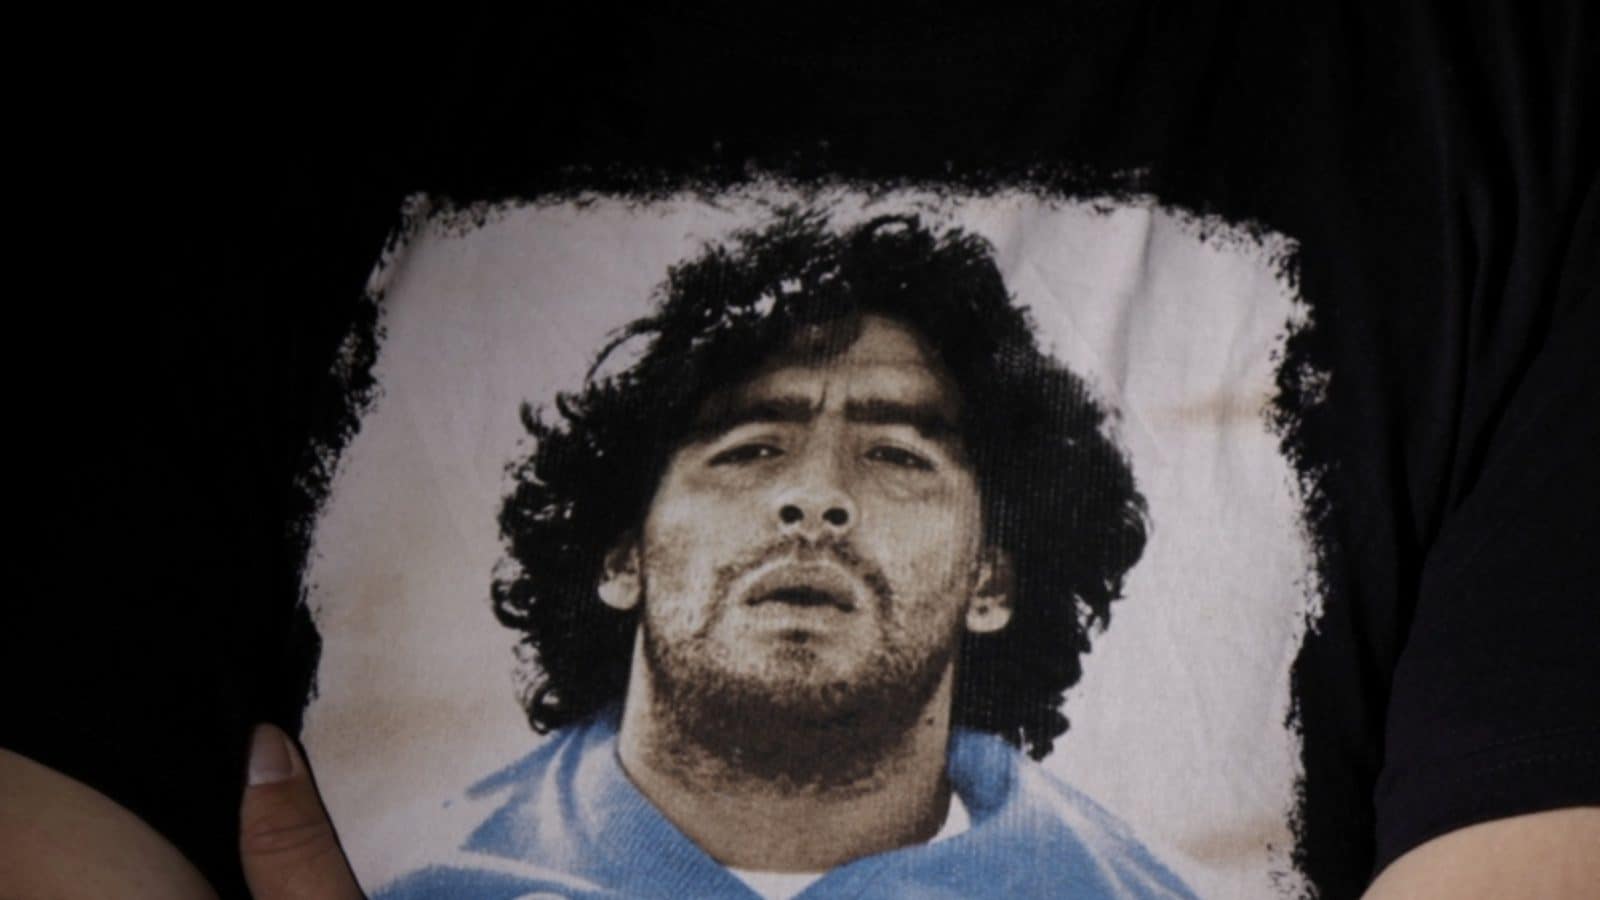 Big-ticket Items Go Unsold in Auction of Diego Maradona Assets